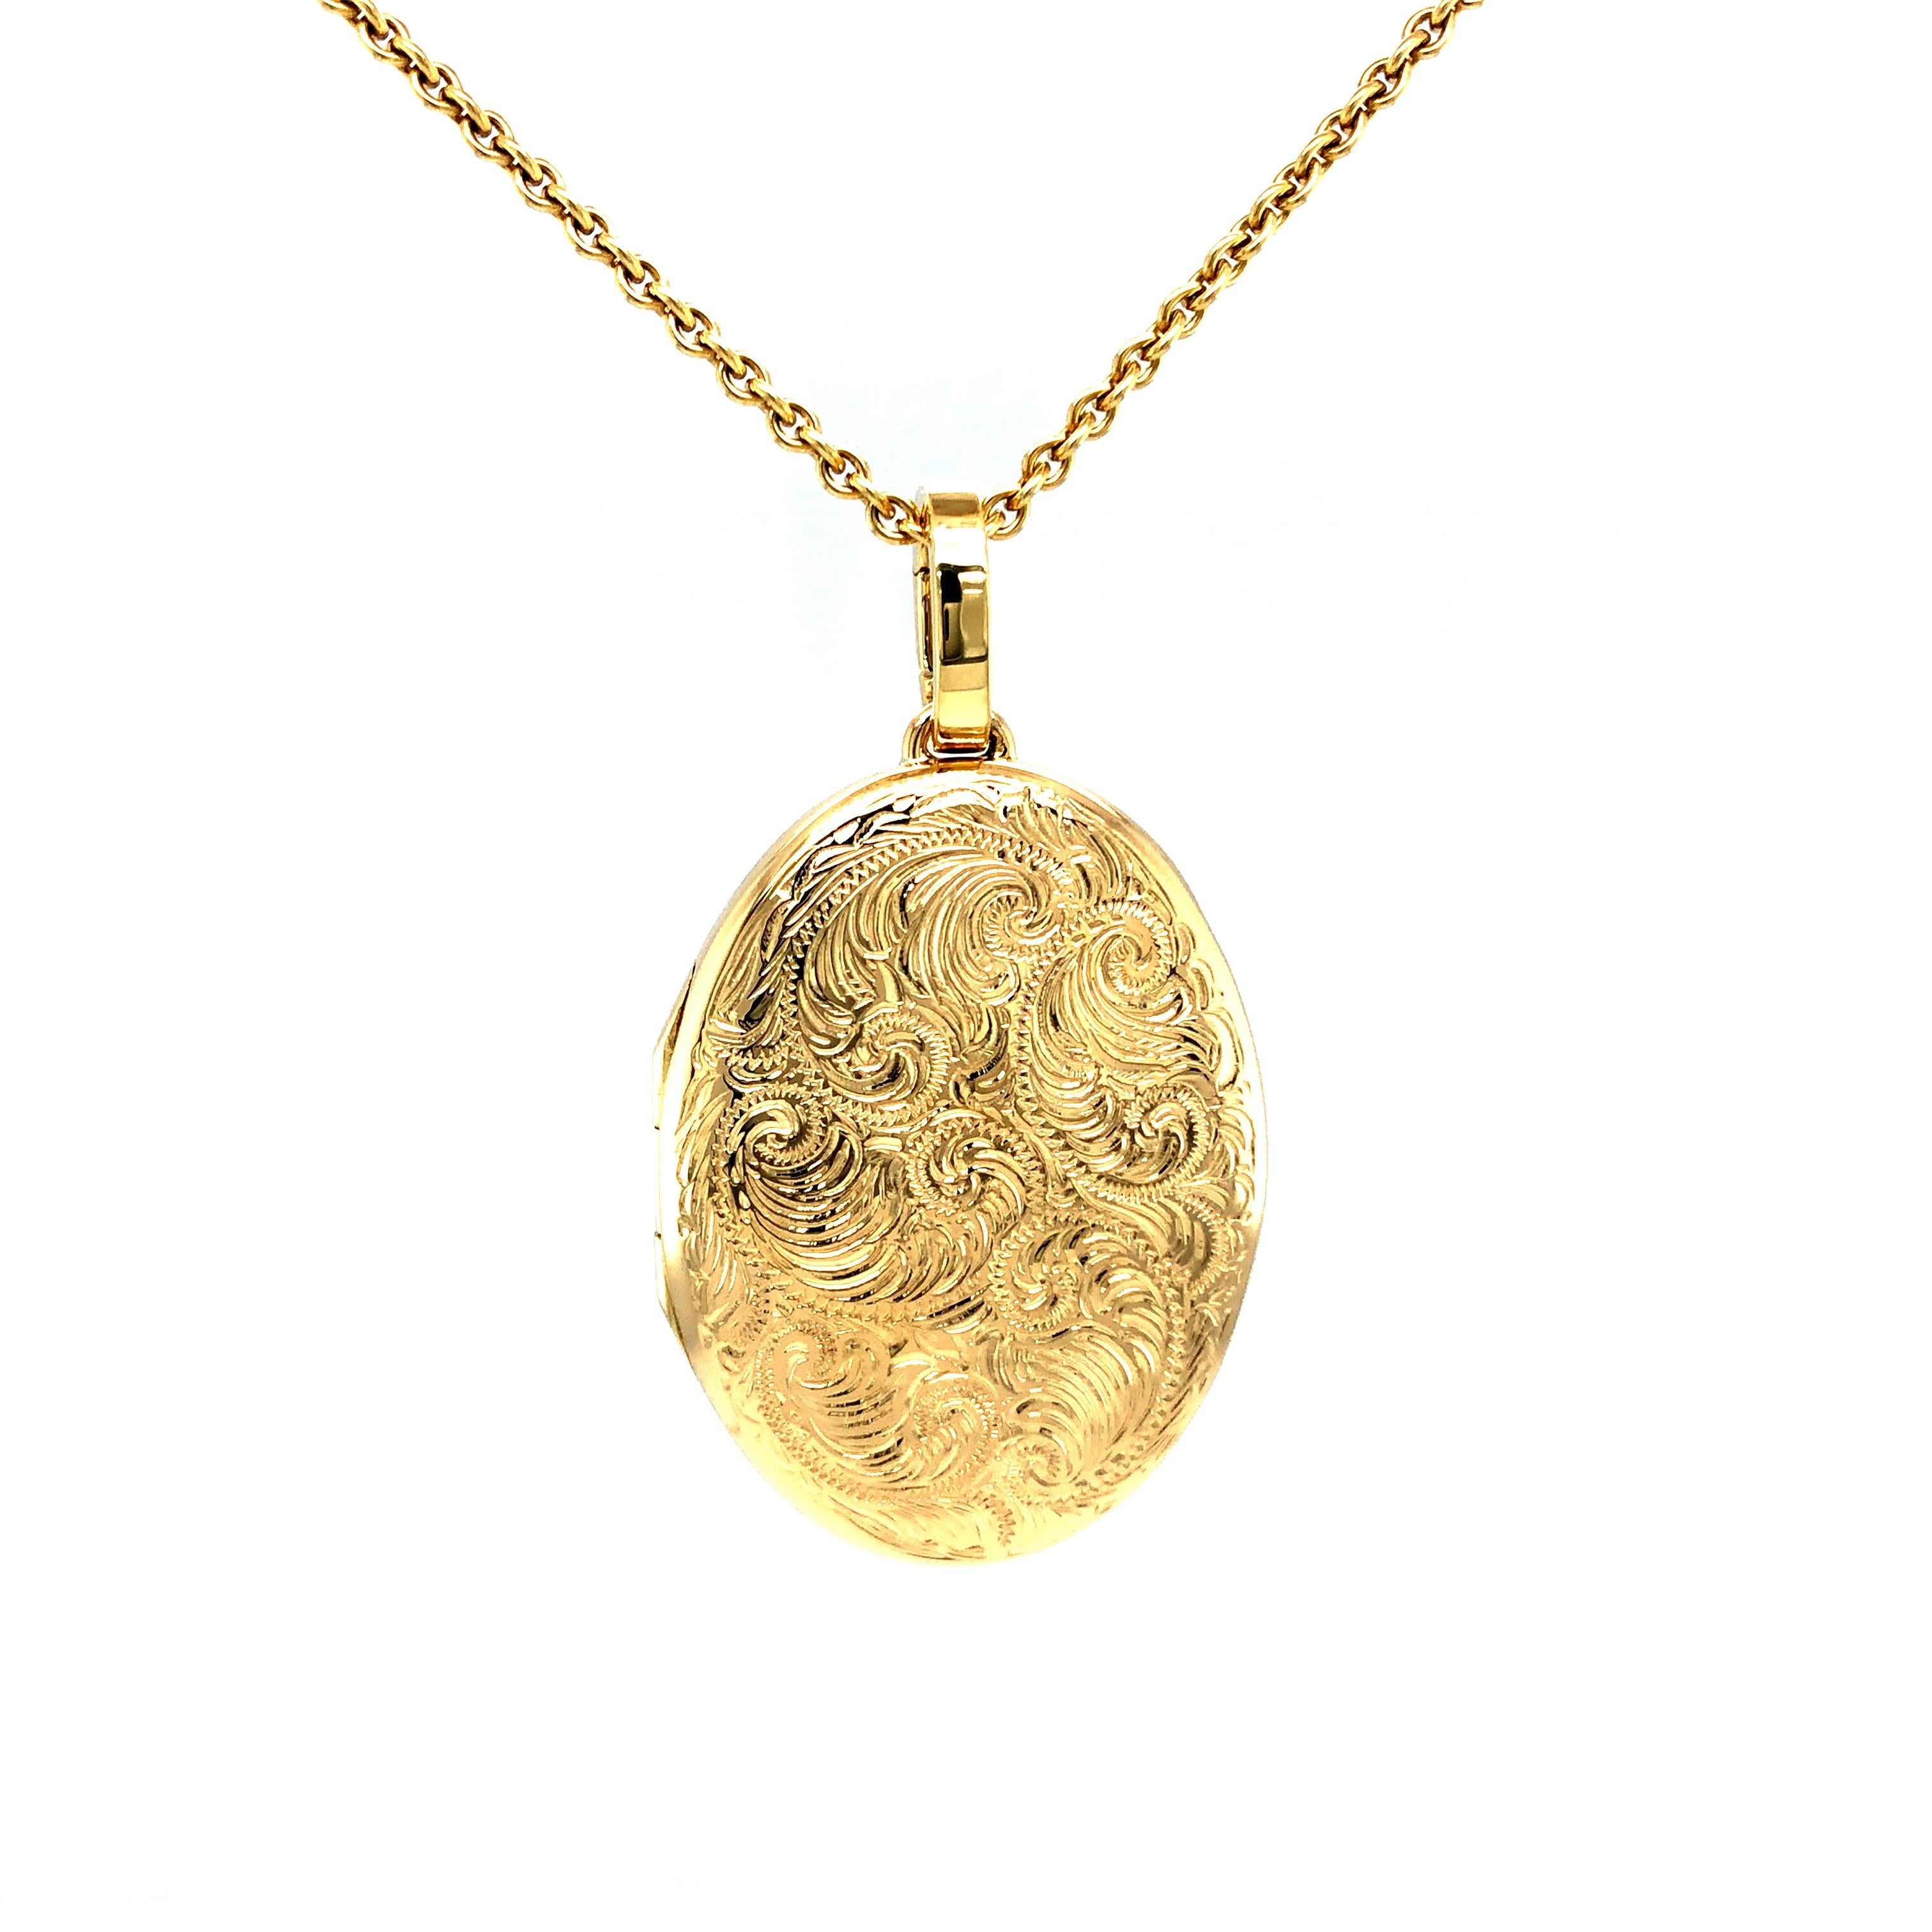 Oval Locket Pendant Necklace Scroll Engraving 18k Yellow Gold 23.0 x 32.0 mm In New Condition For Sale In Pforzheim, DE